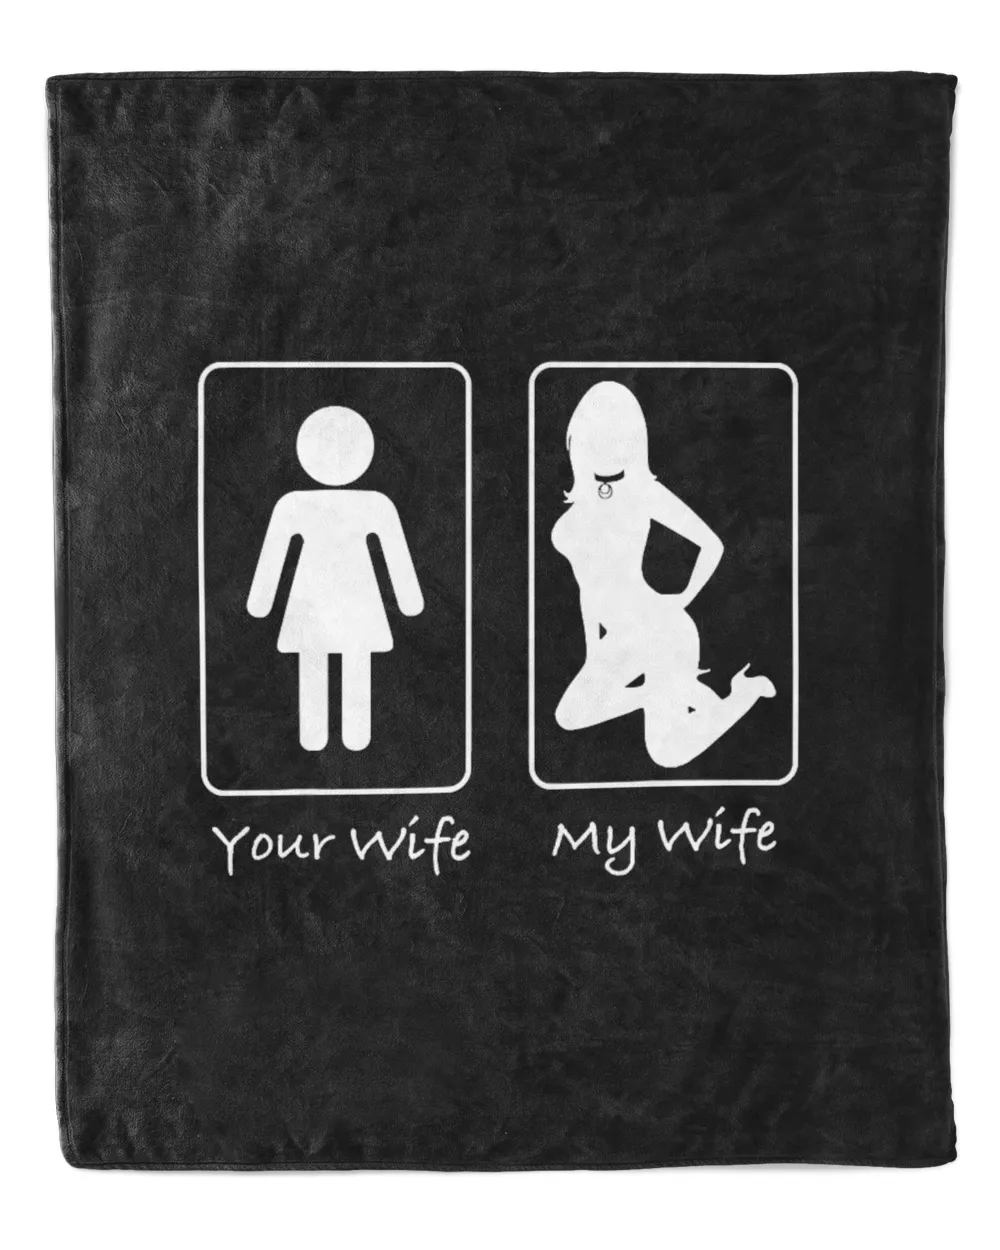 Your Wife My Wife Funny Relationship Couple T-Shirt